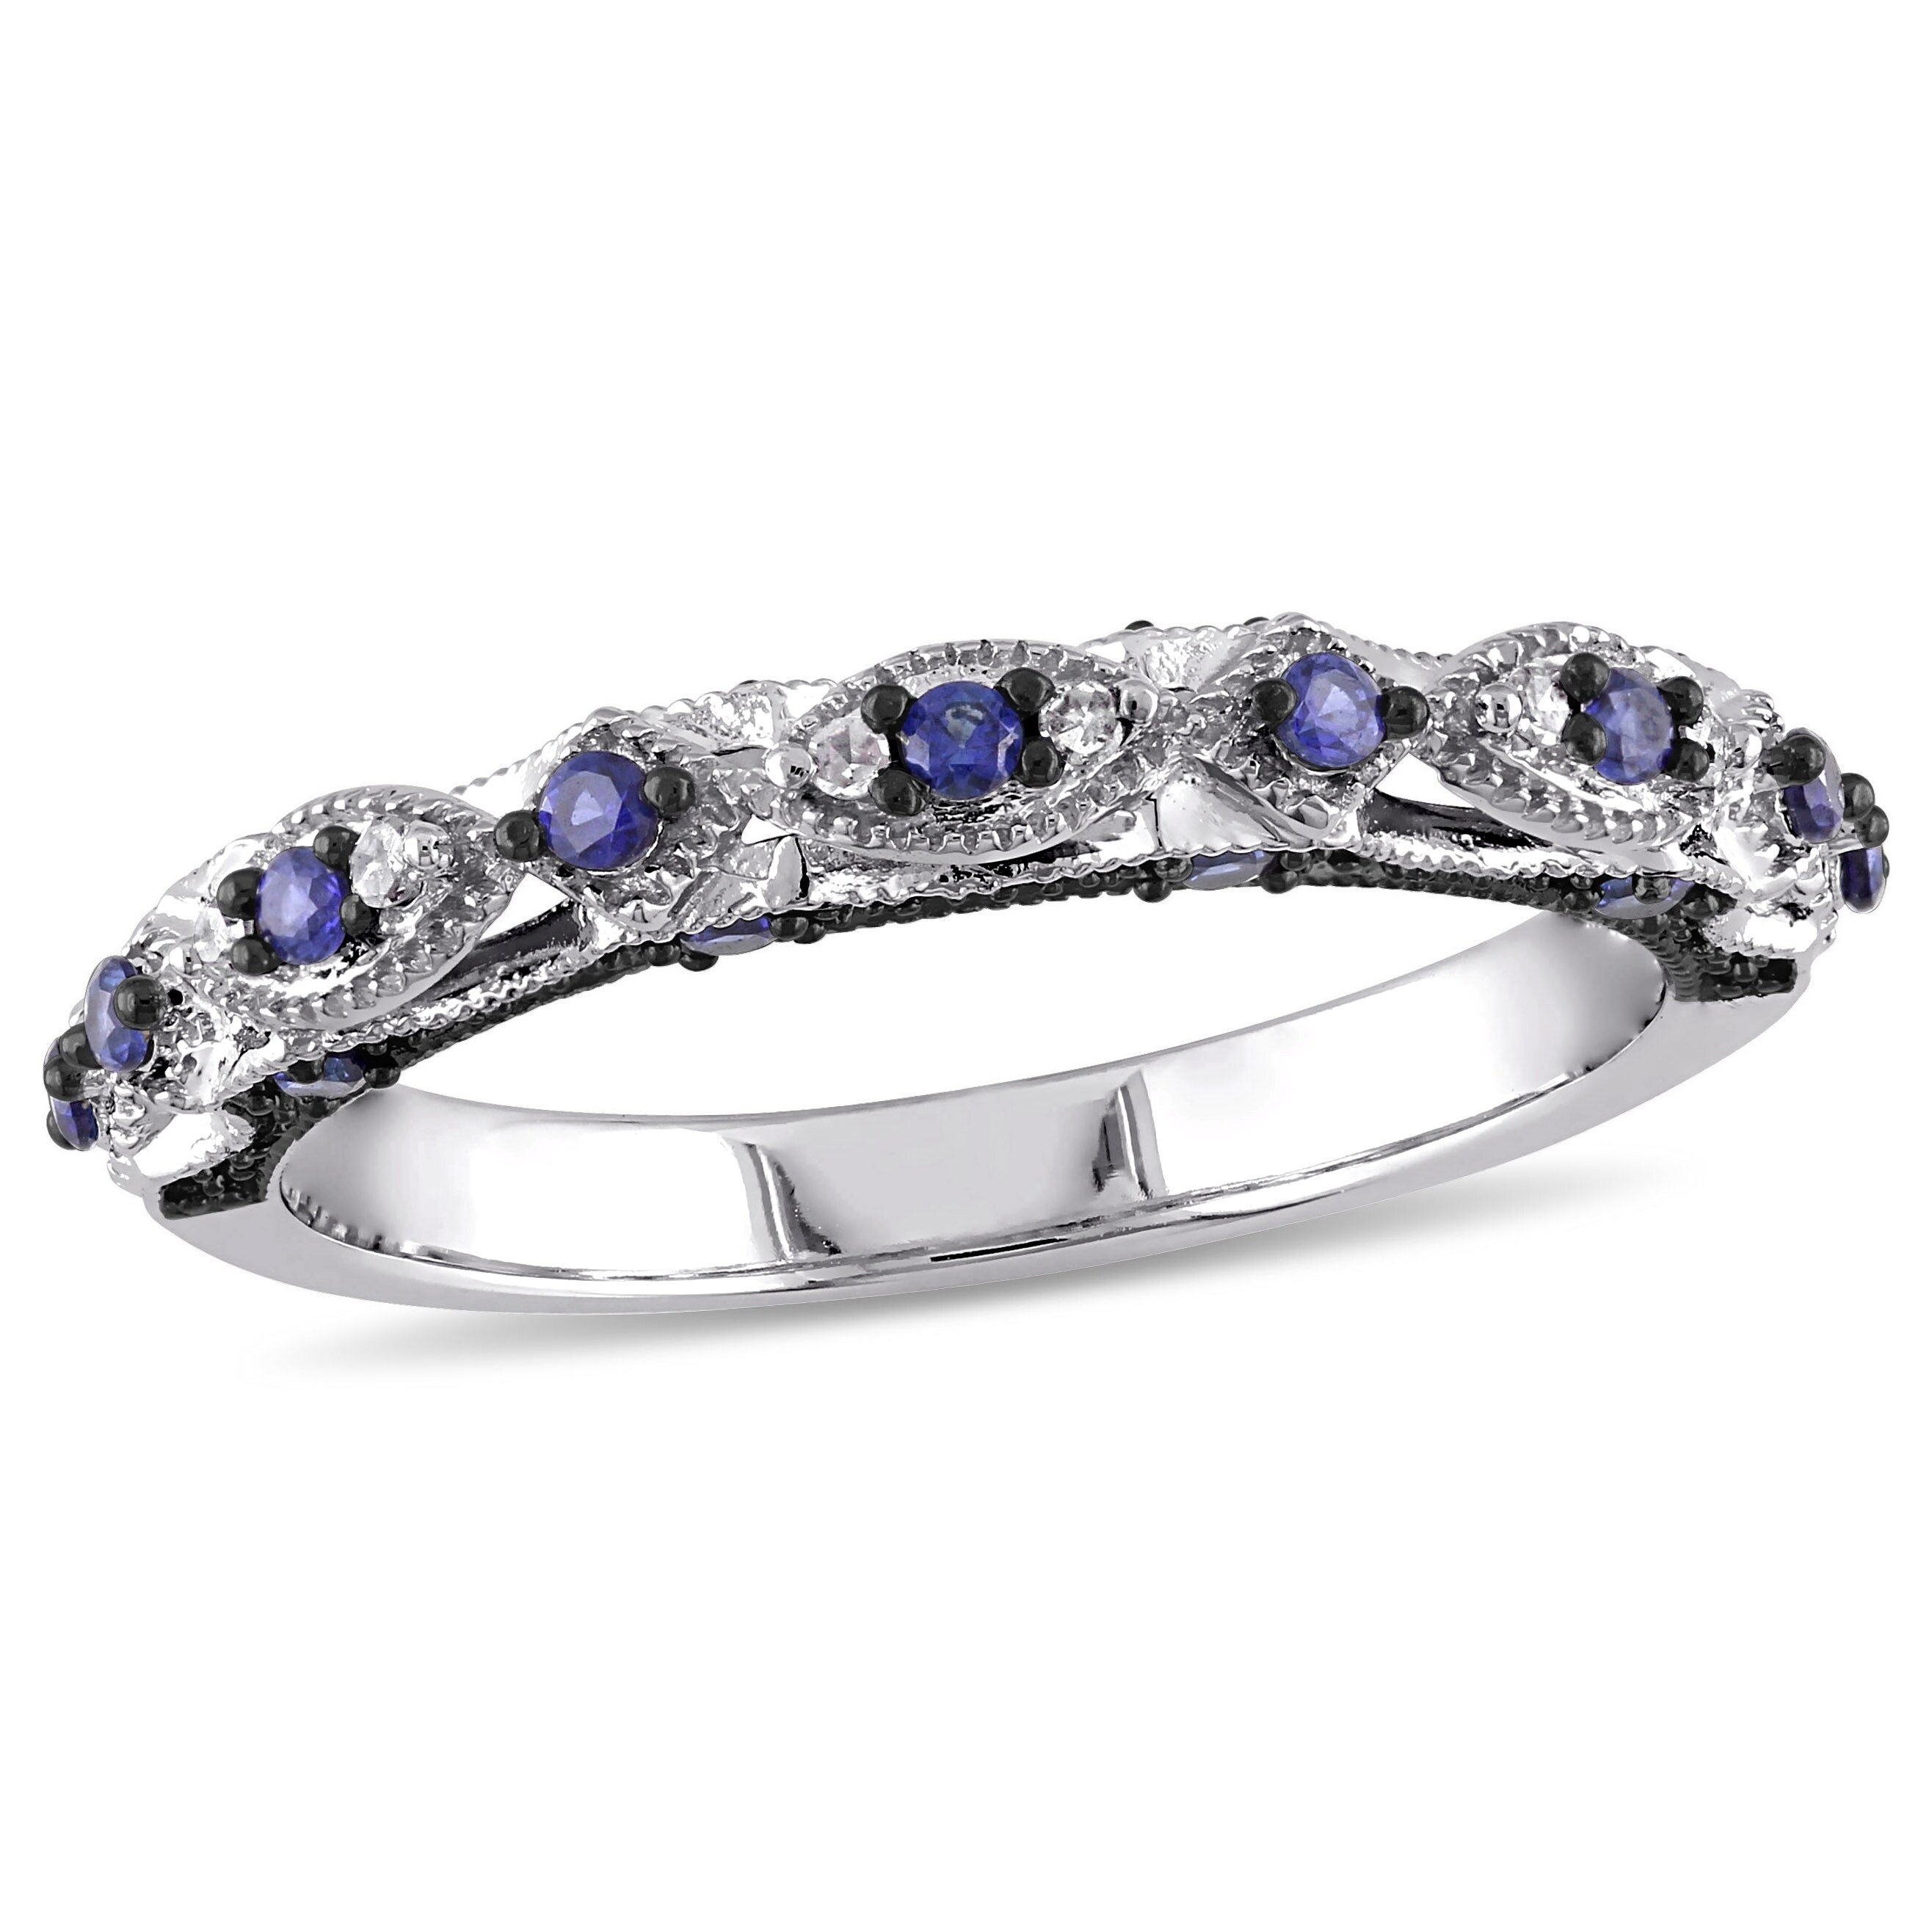 Mother’s Day Full Eternity Band Created Sapphire Wedding Ring 10K Gold $745